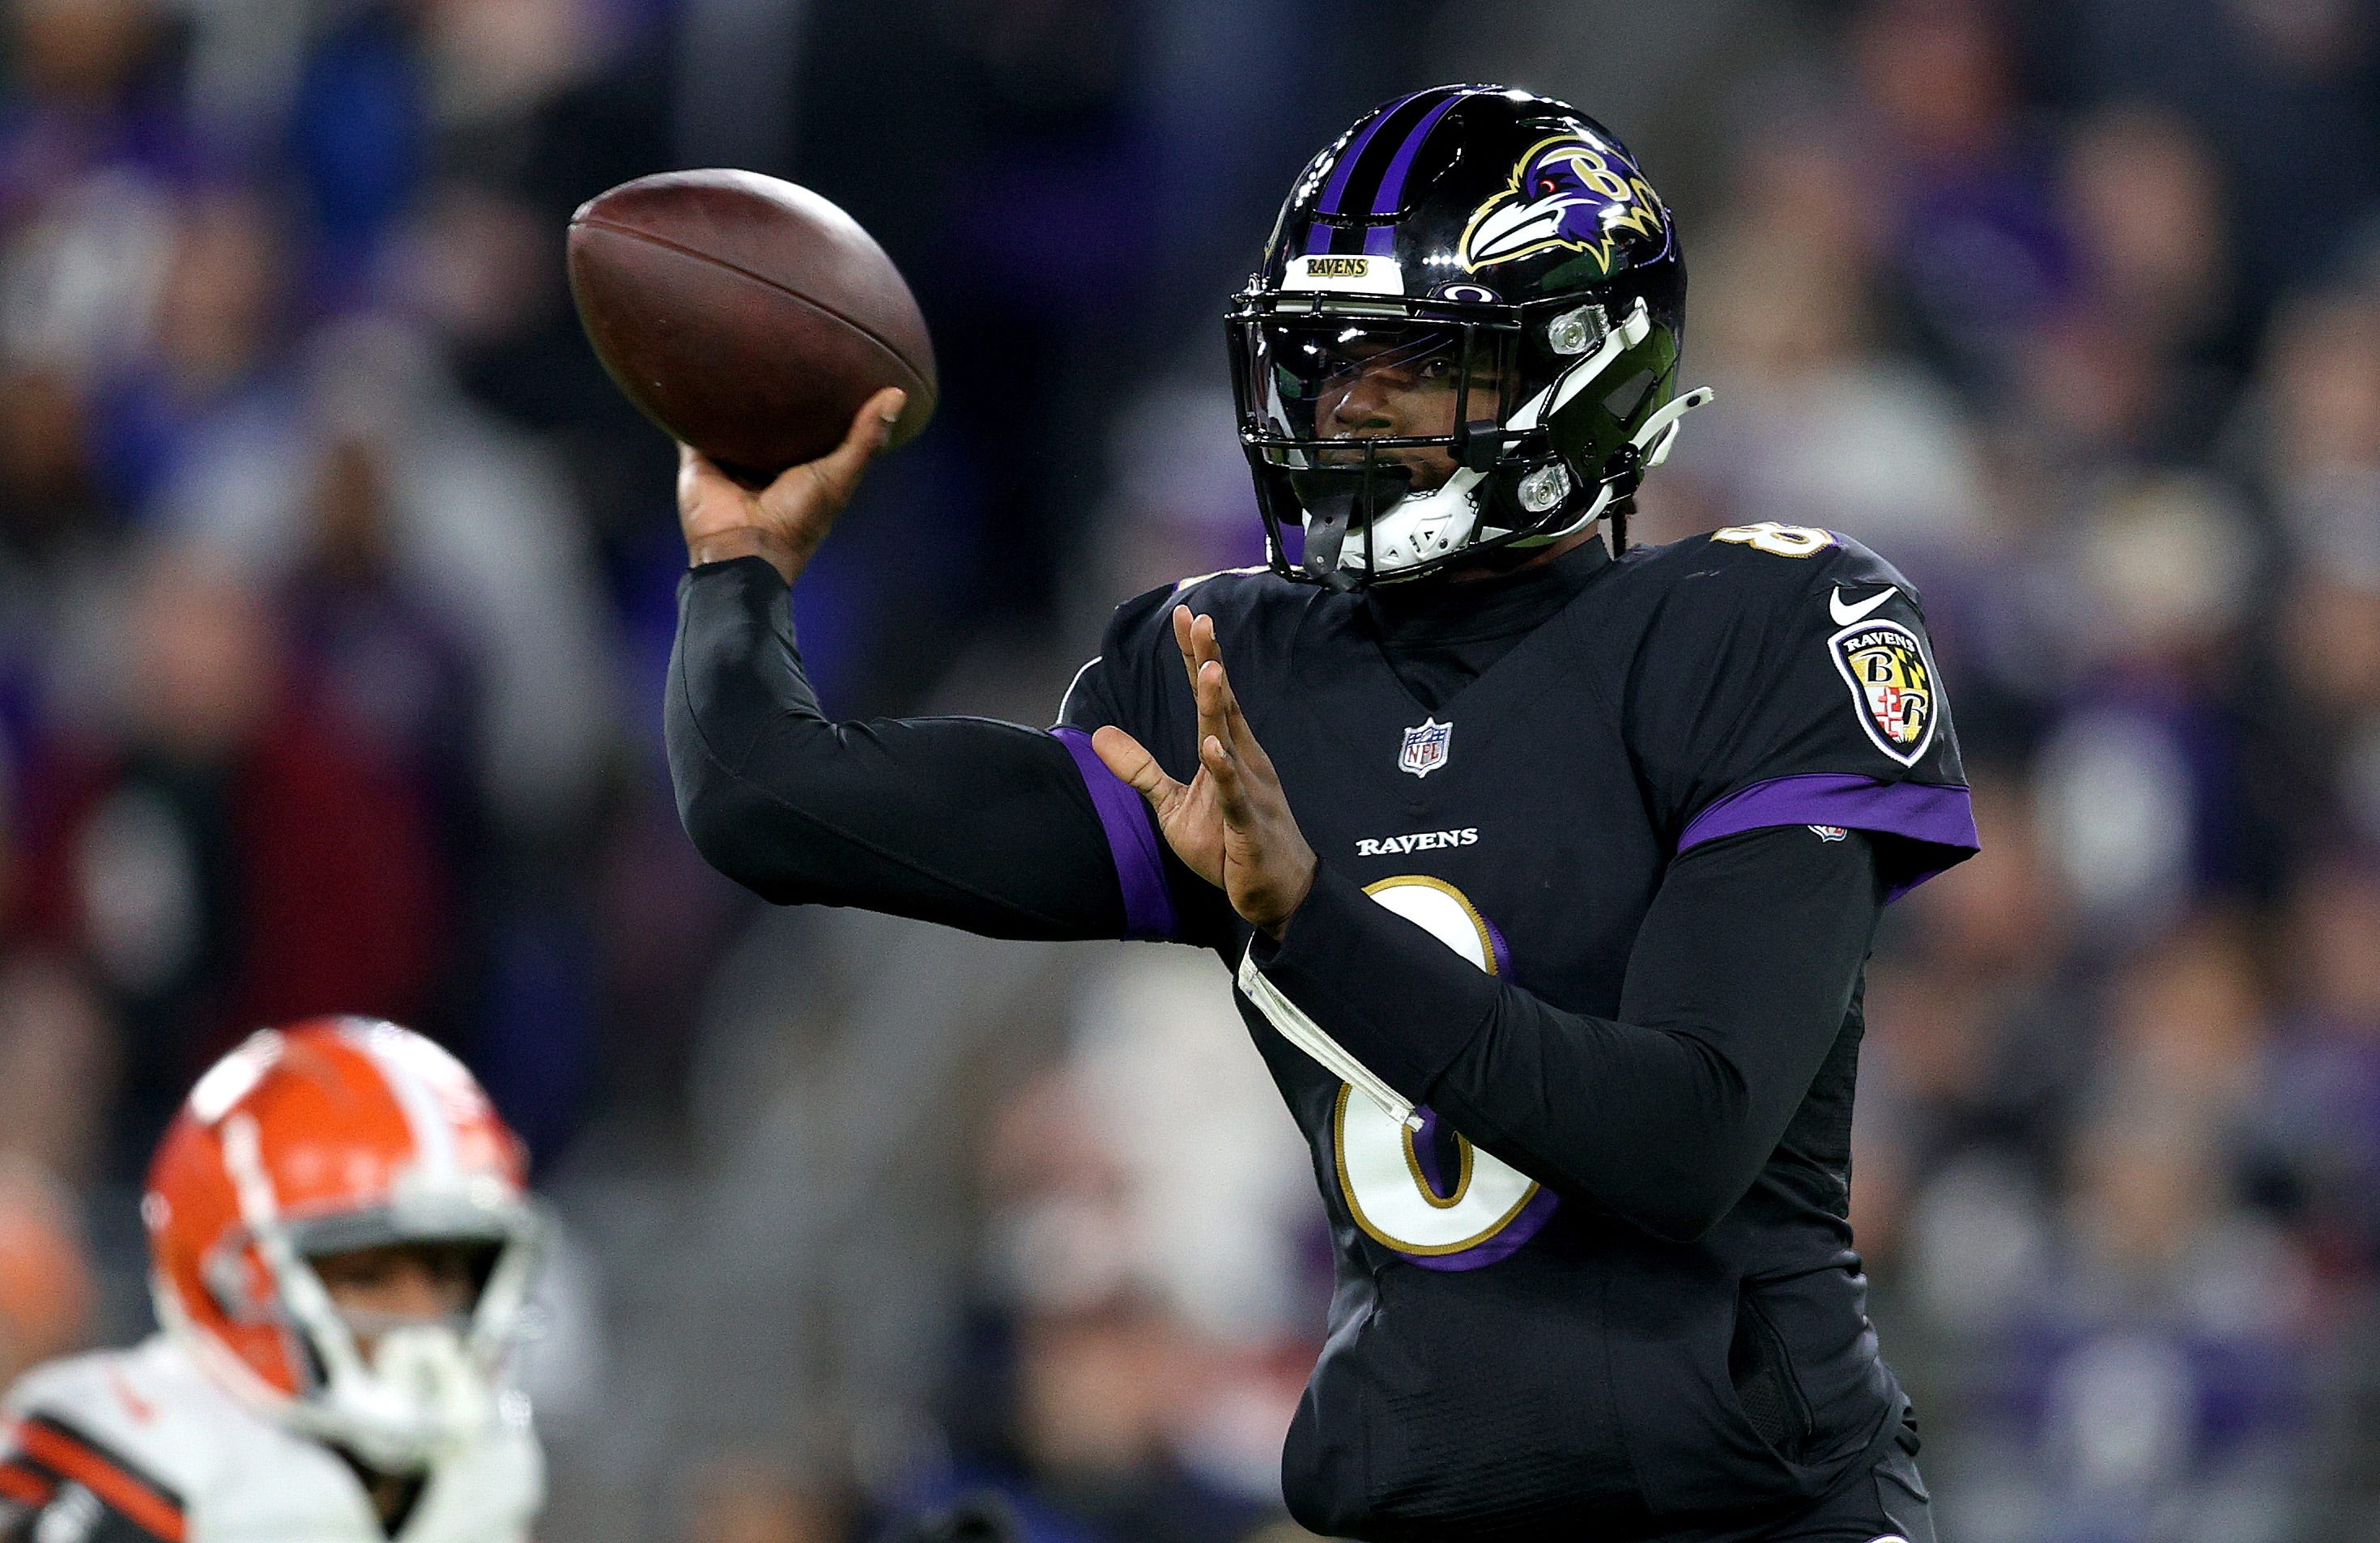 Ravens overcome Lamar Jackson's four interceptions to beat Browns, move into slot for AFC's No. 1 seed